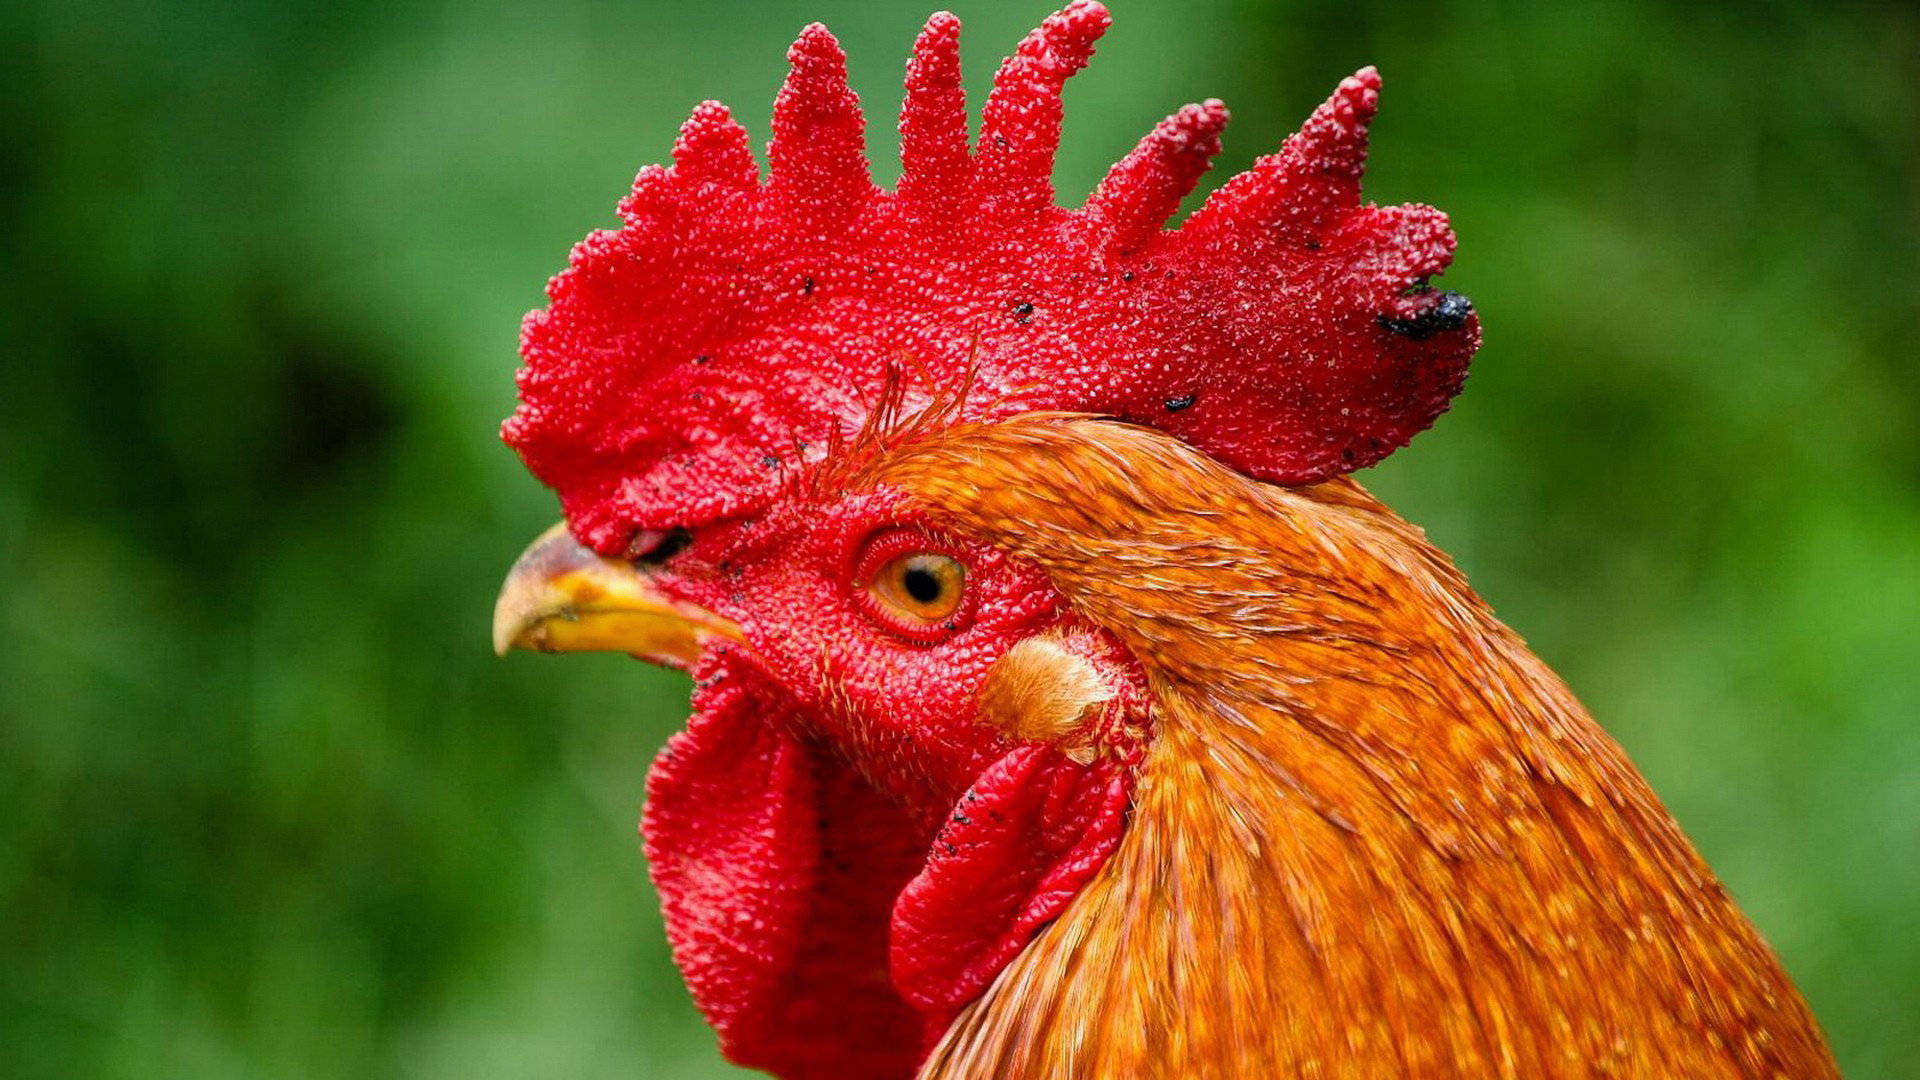 Majestic Rooster Displaying Vibrant Plumage Wallpaper